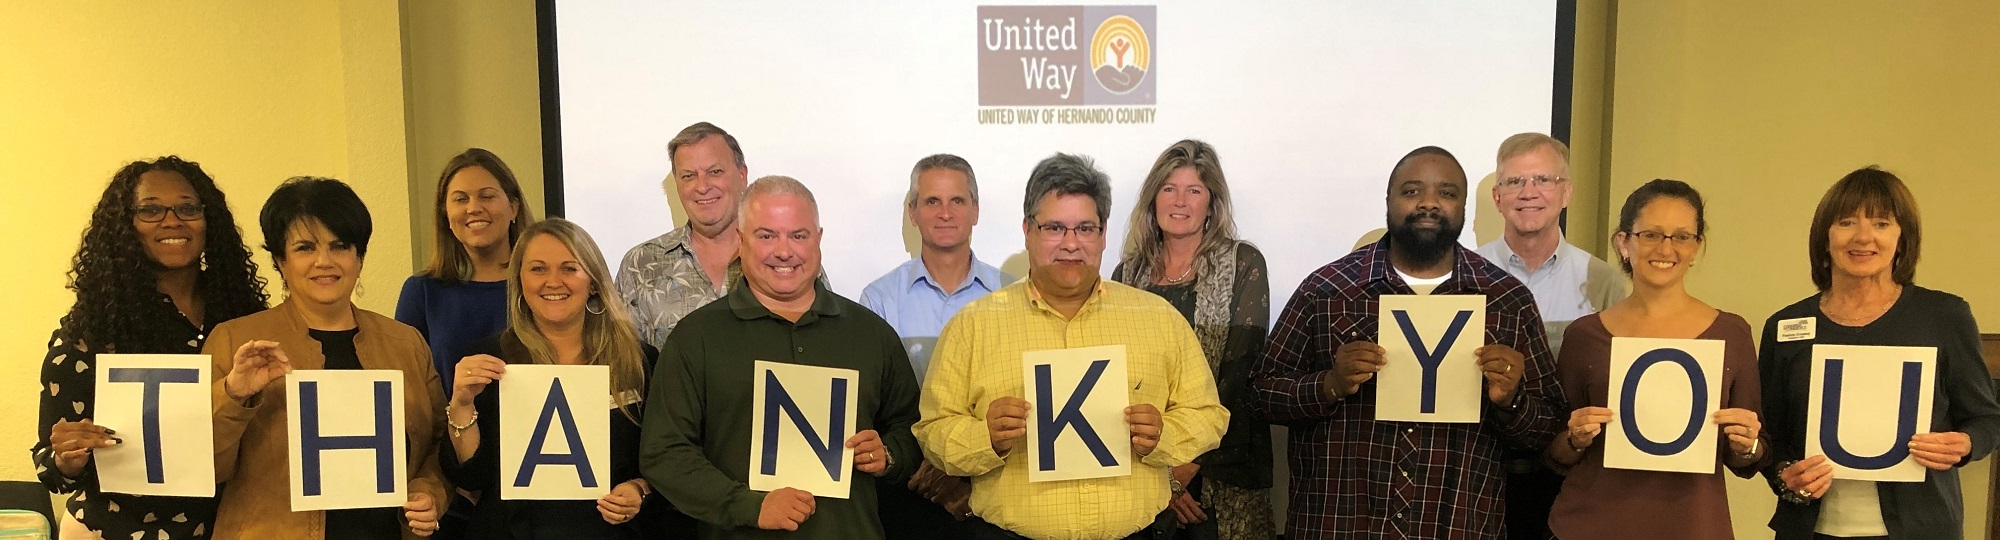 Board of Directors holding up THANK YOU sign